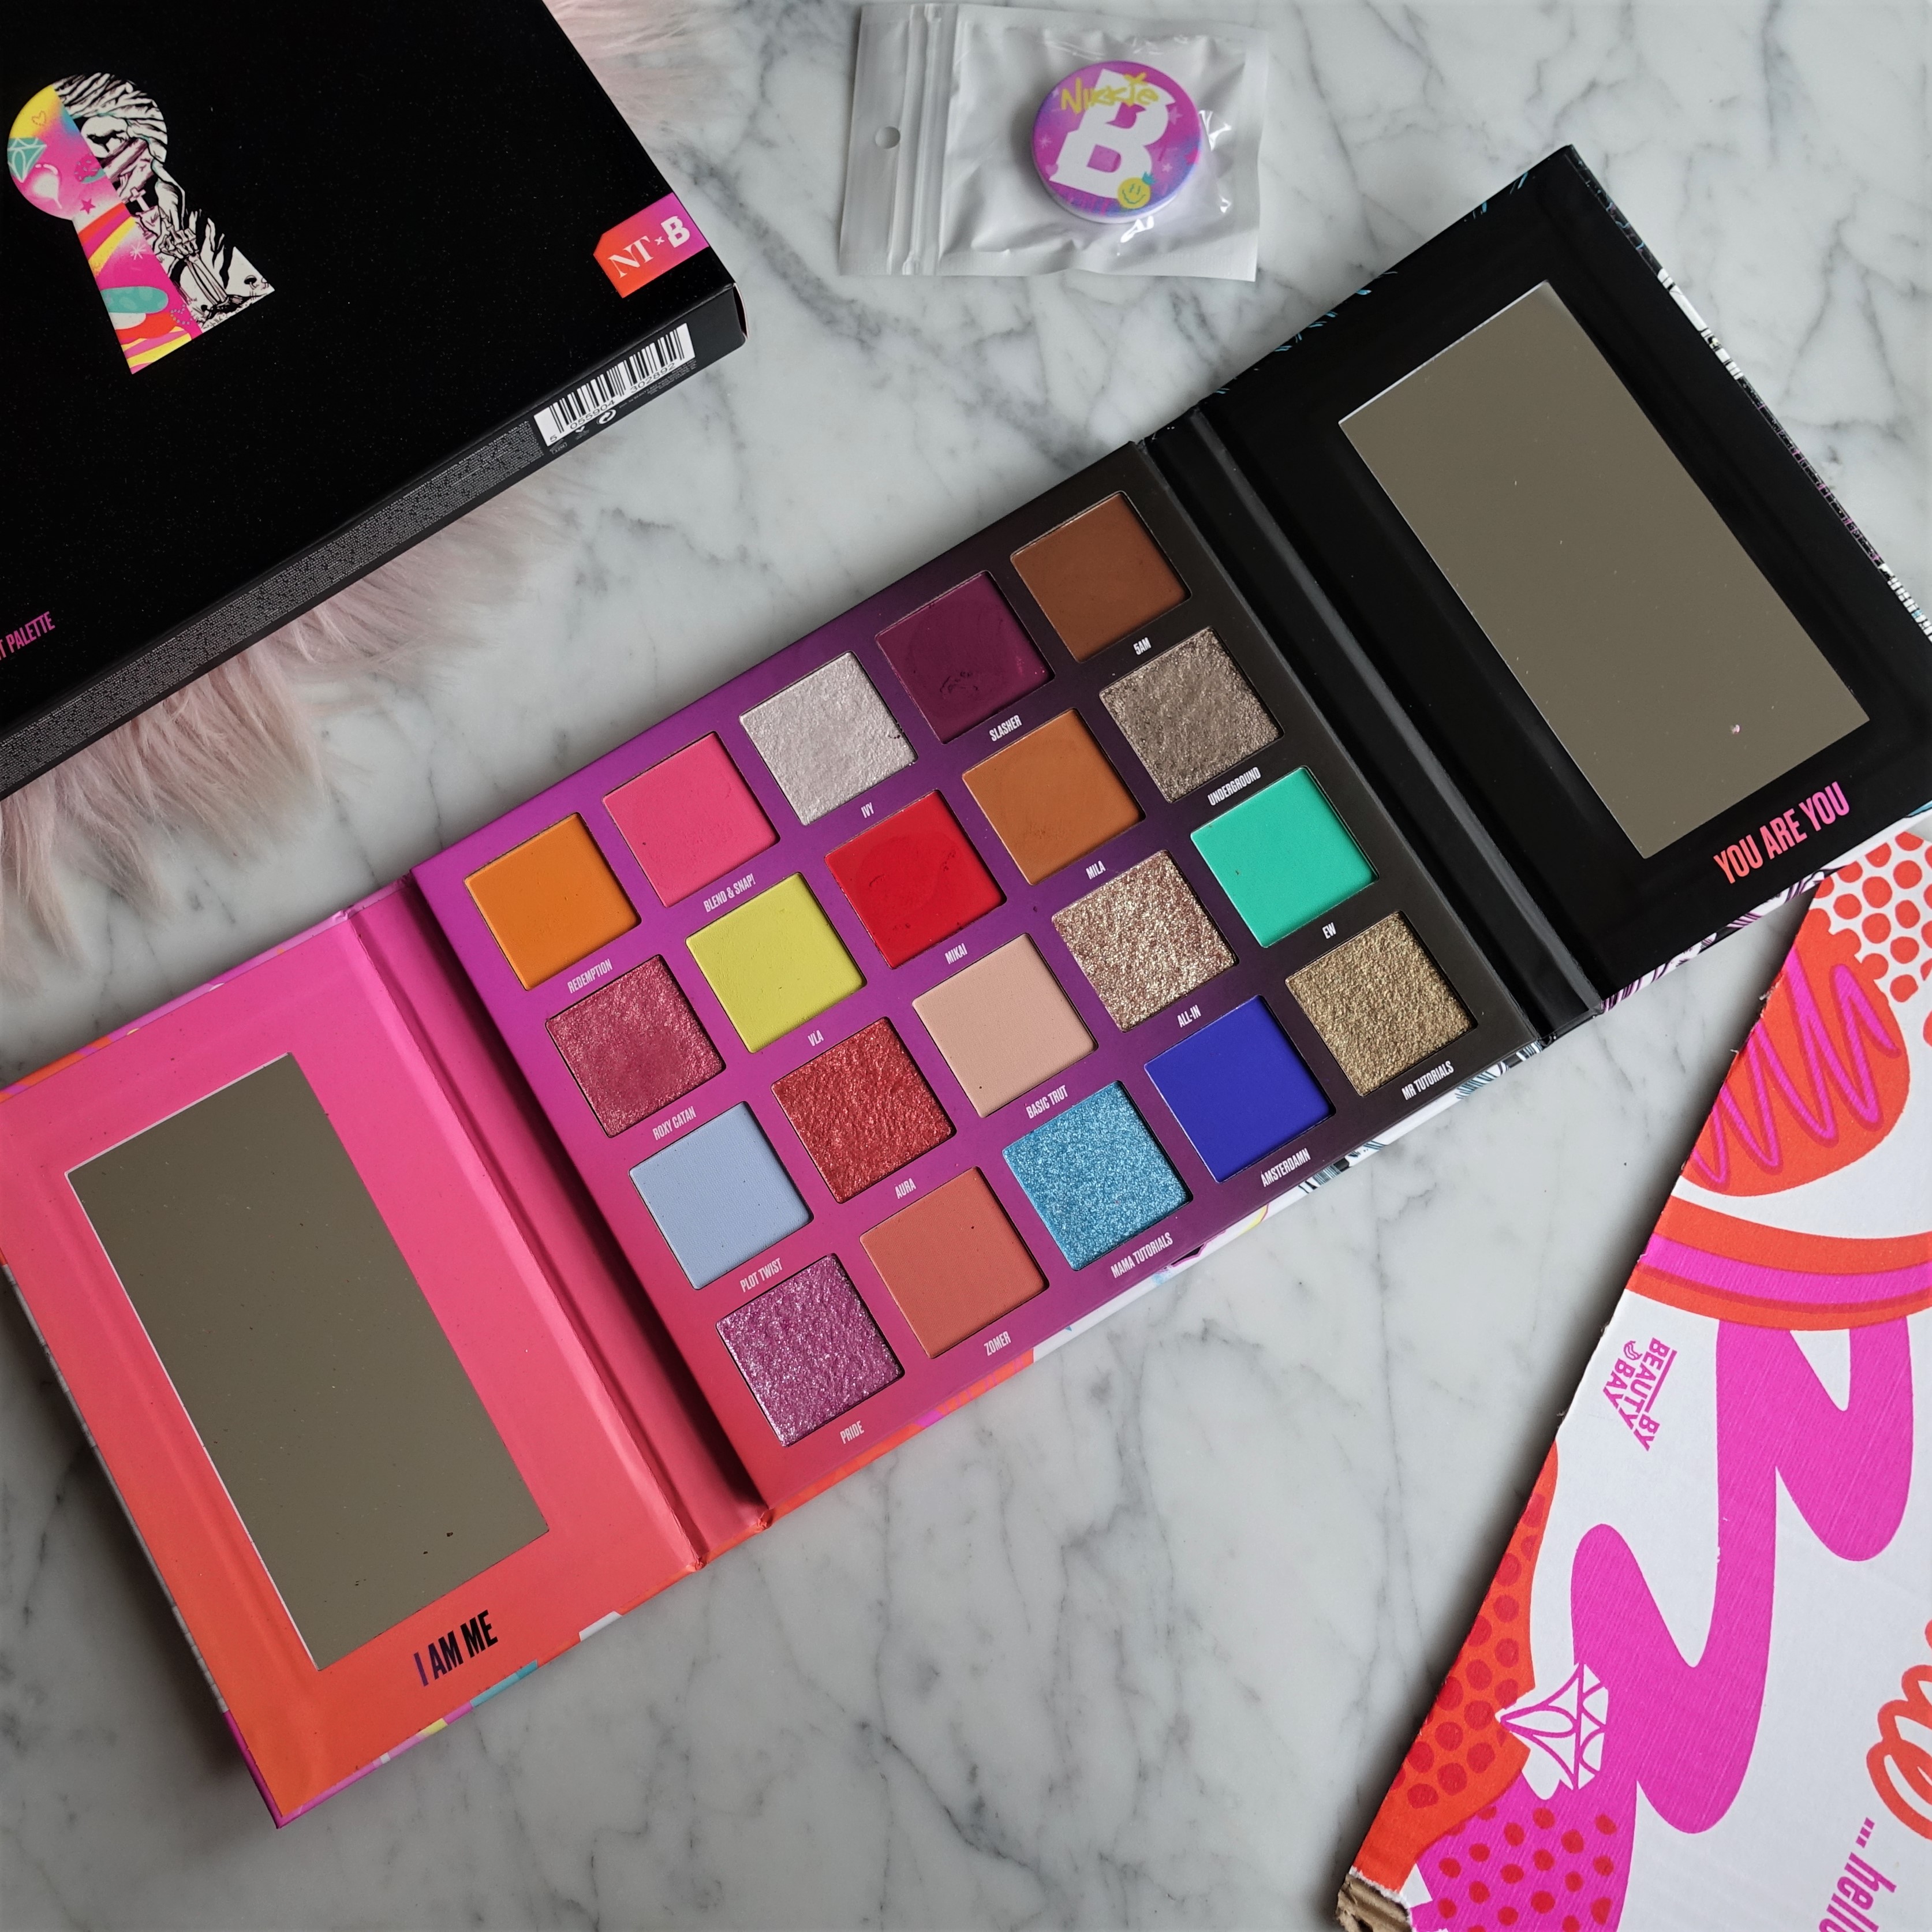 Nikkie Tutorials x Beauty Bay Collaboration Palette Review - Pop Socket and Palette